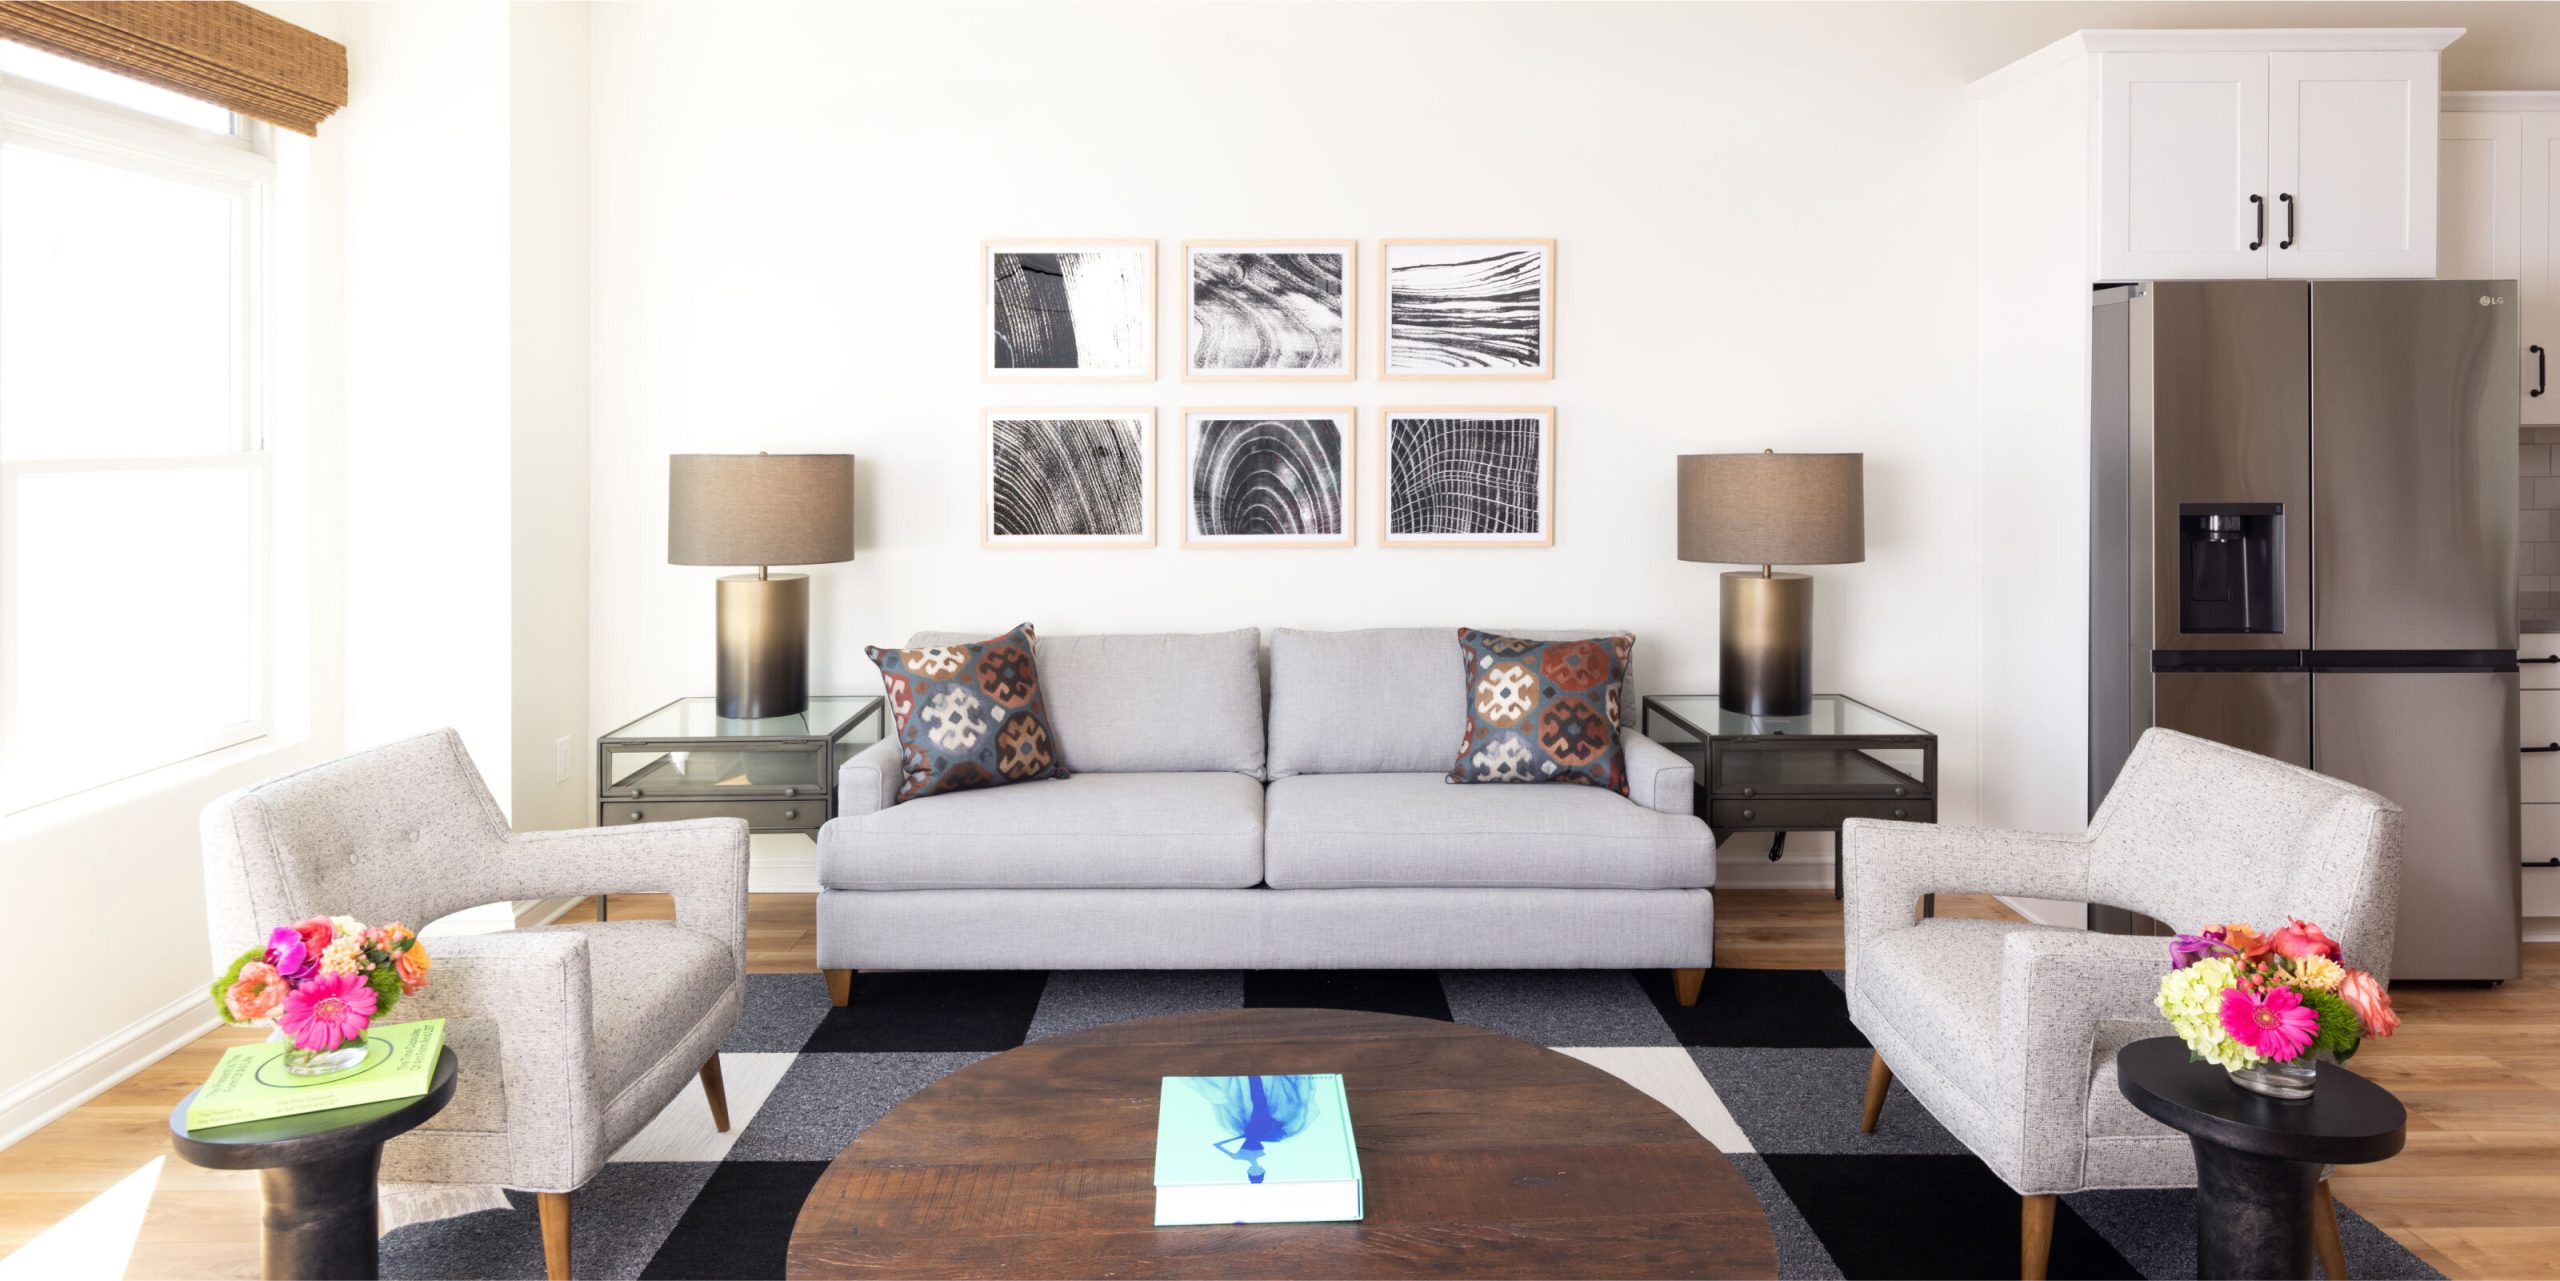 A stylish living room featuring a grey sofa with patterned throw pillows, two light grey armchairs, and a round wooden coffee table on a black and white checkered rug. The walls are adorned with black and white framed art, and there are two modern table lamps on either side of the sofa.